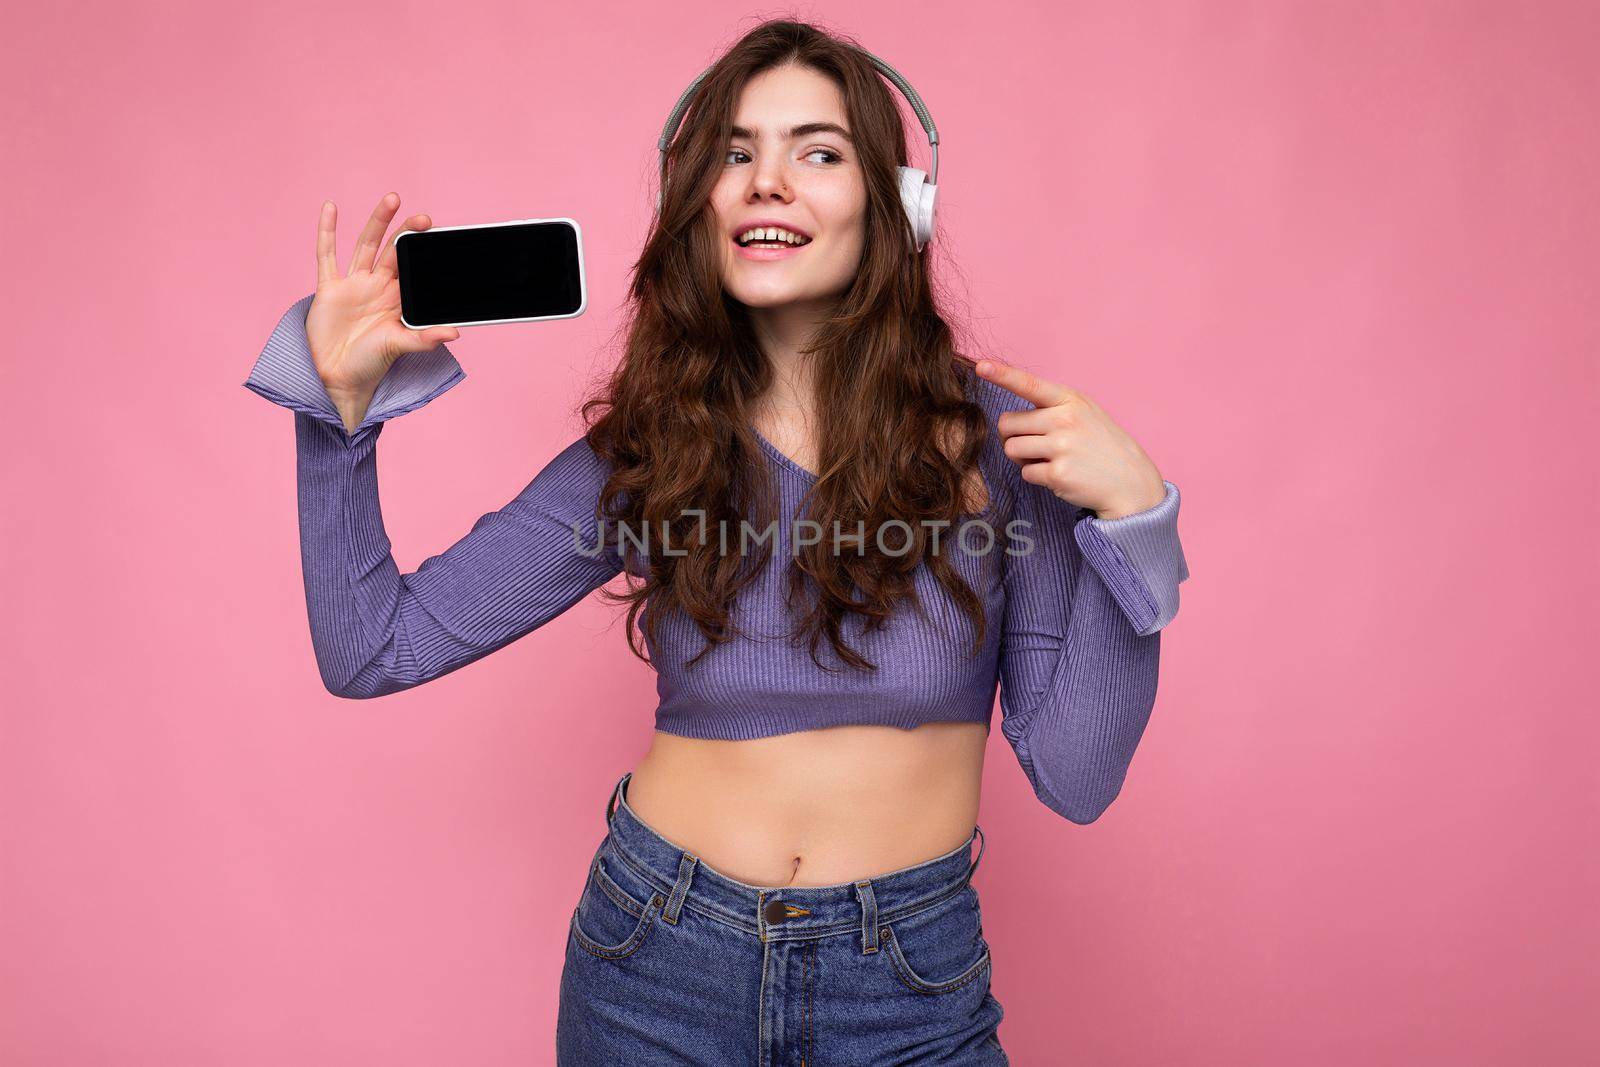 Attractive positive smiling young woman wearing stylish casual outfit isolated on colourful background wall holding and showing mobile phone with empty screen for cutout wearing white bluetooth headphones and having fun looking to the side by TRMK